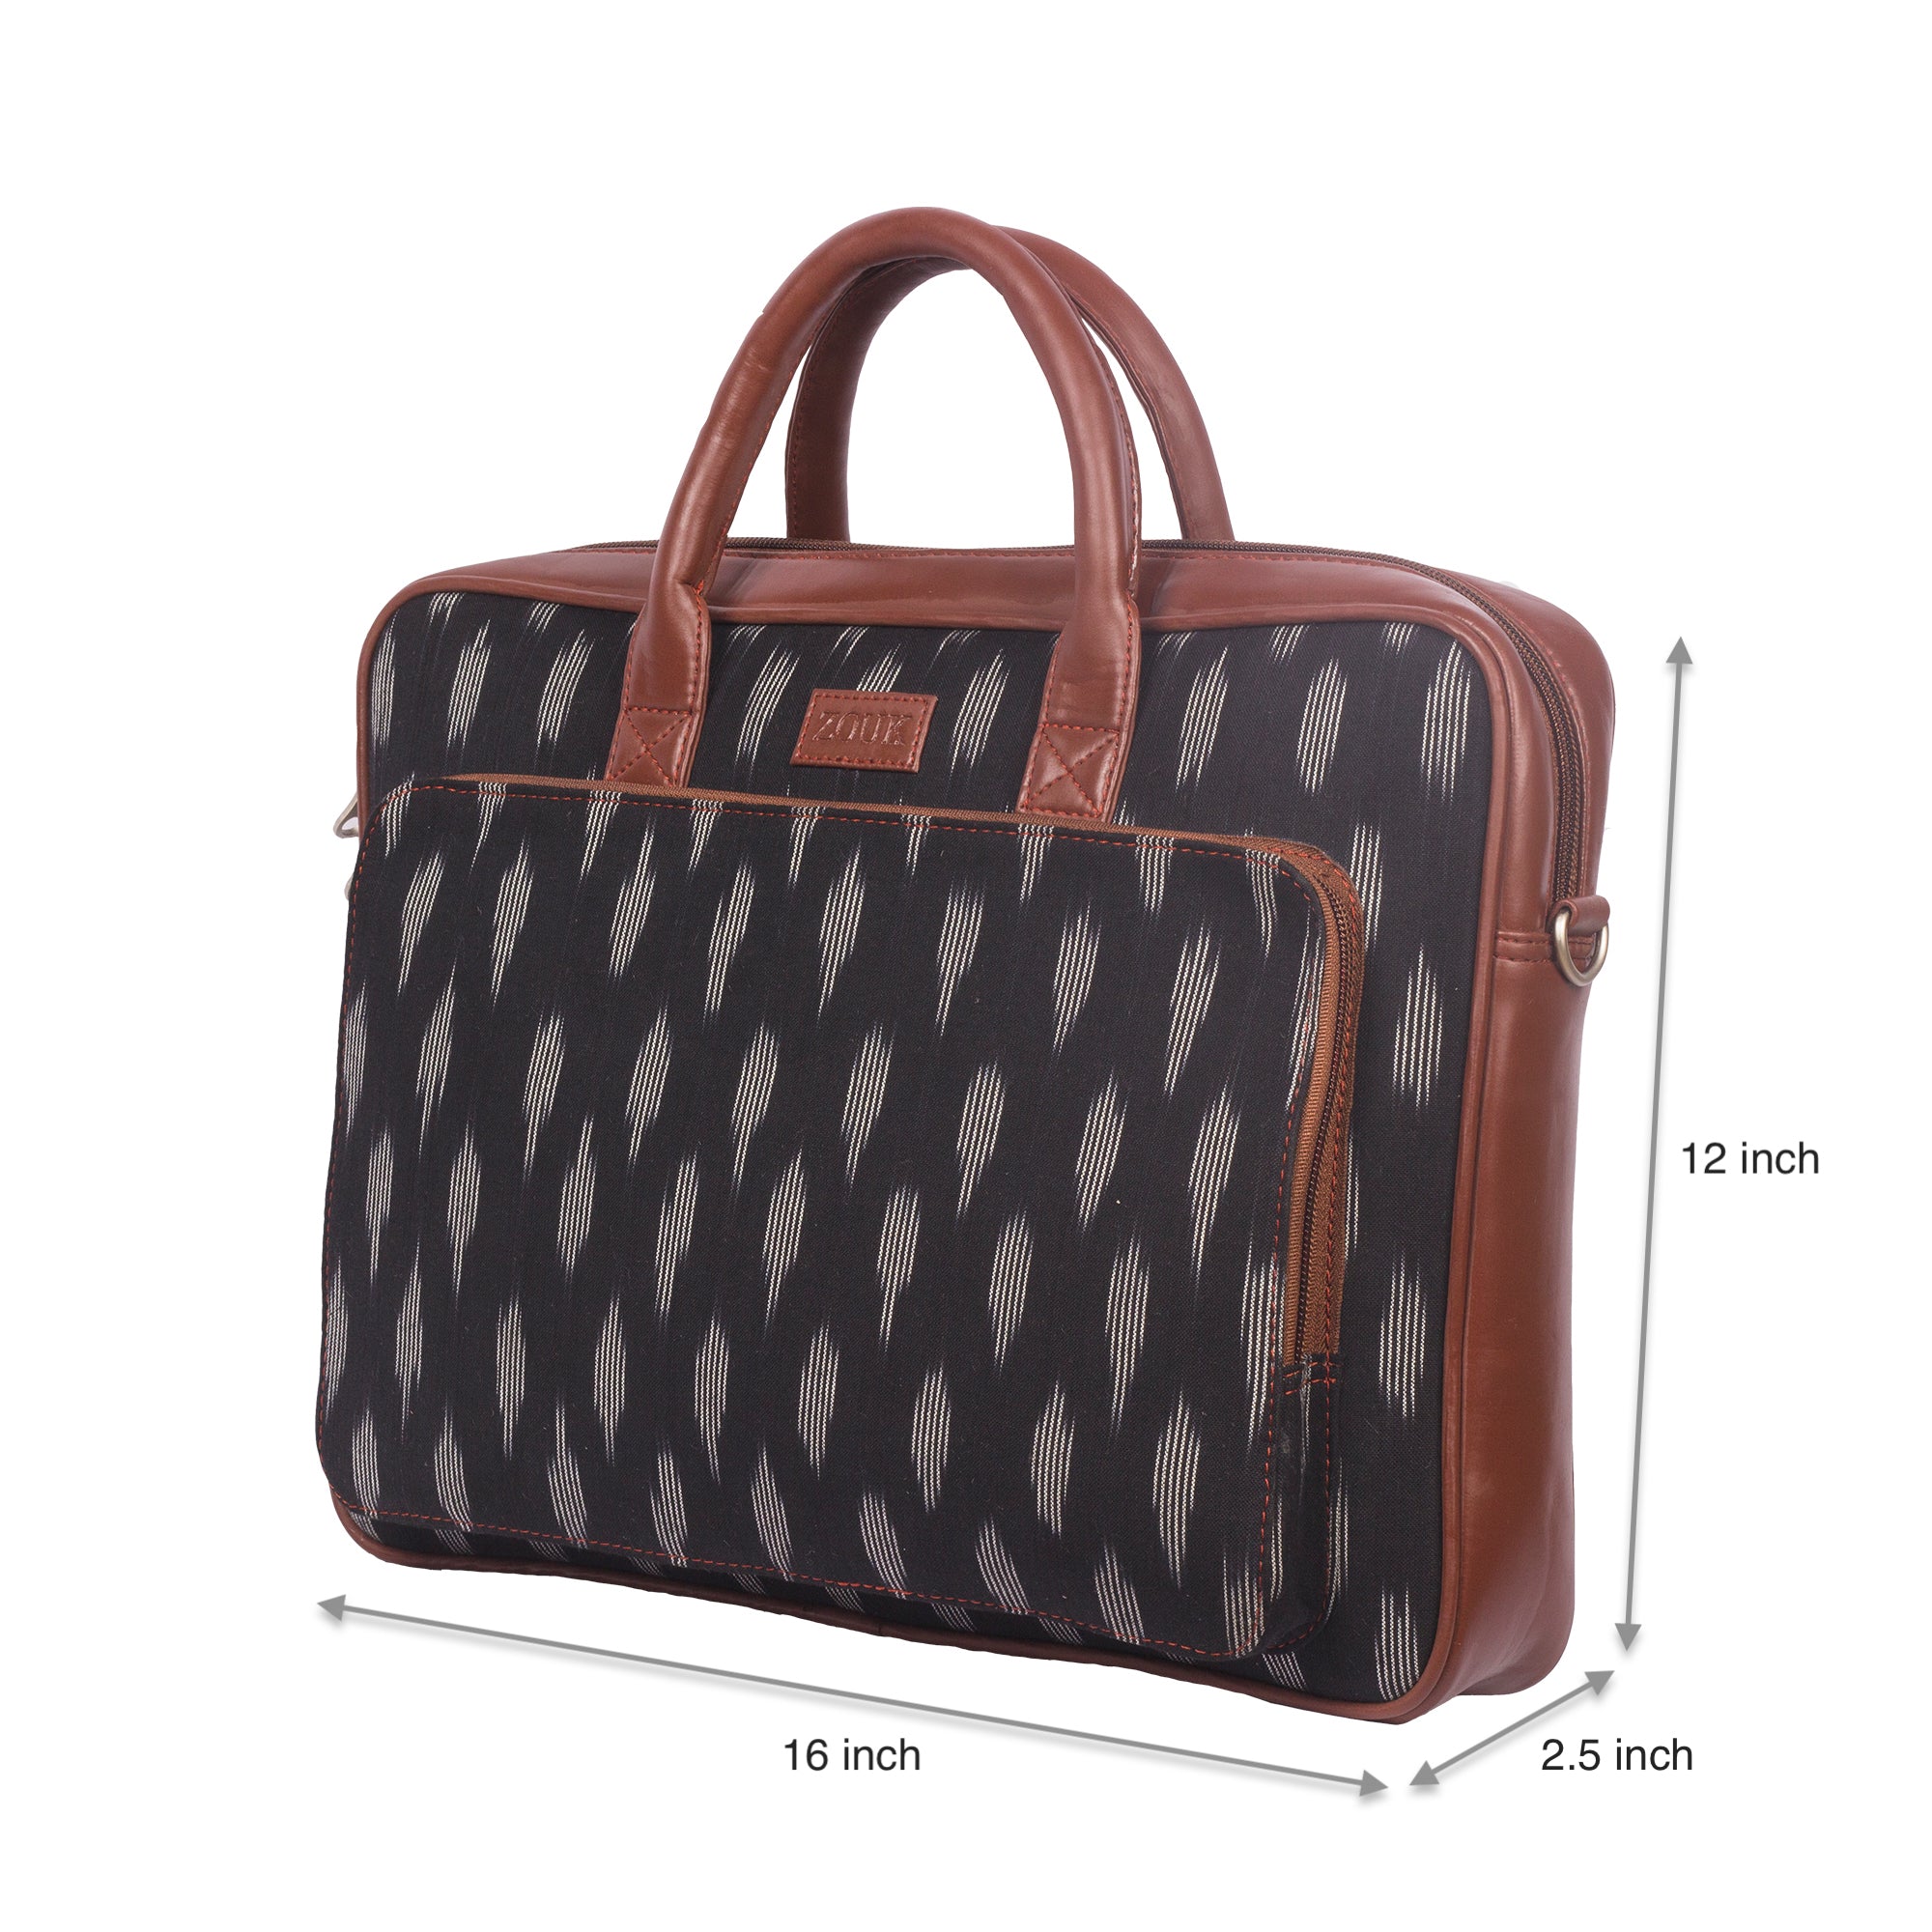 Ikat Striped Black Laptop Bag with dimensions